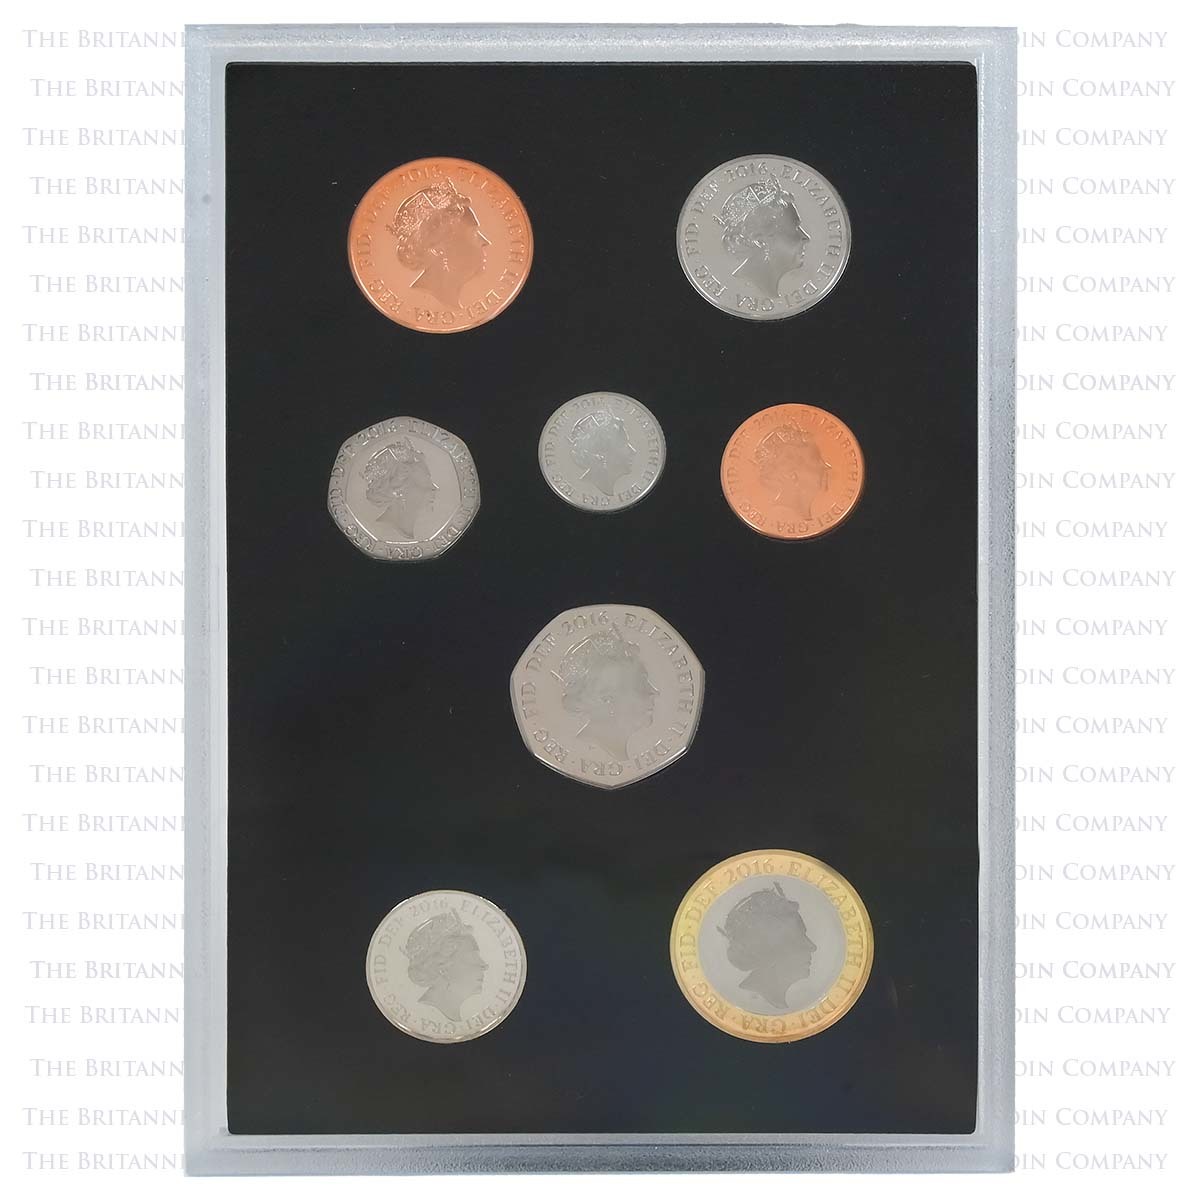 2016-proof-coin-set-collector-edtition-005-m